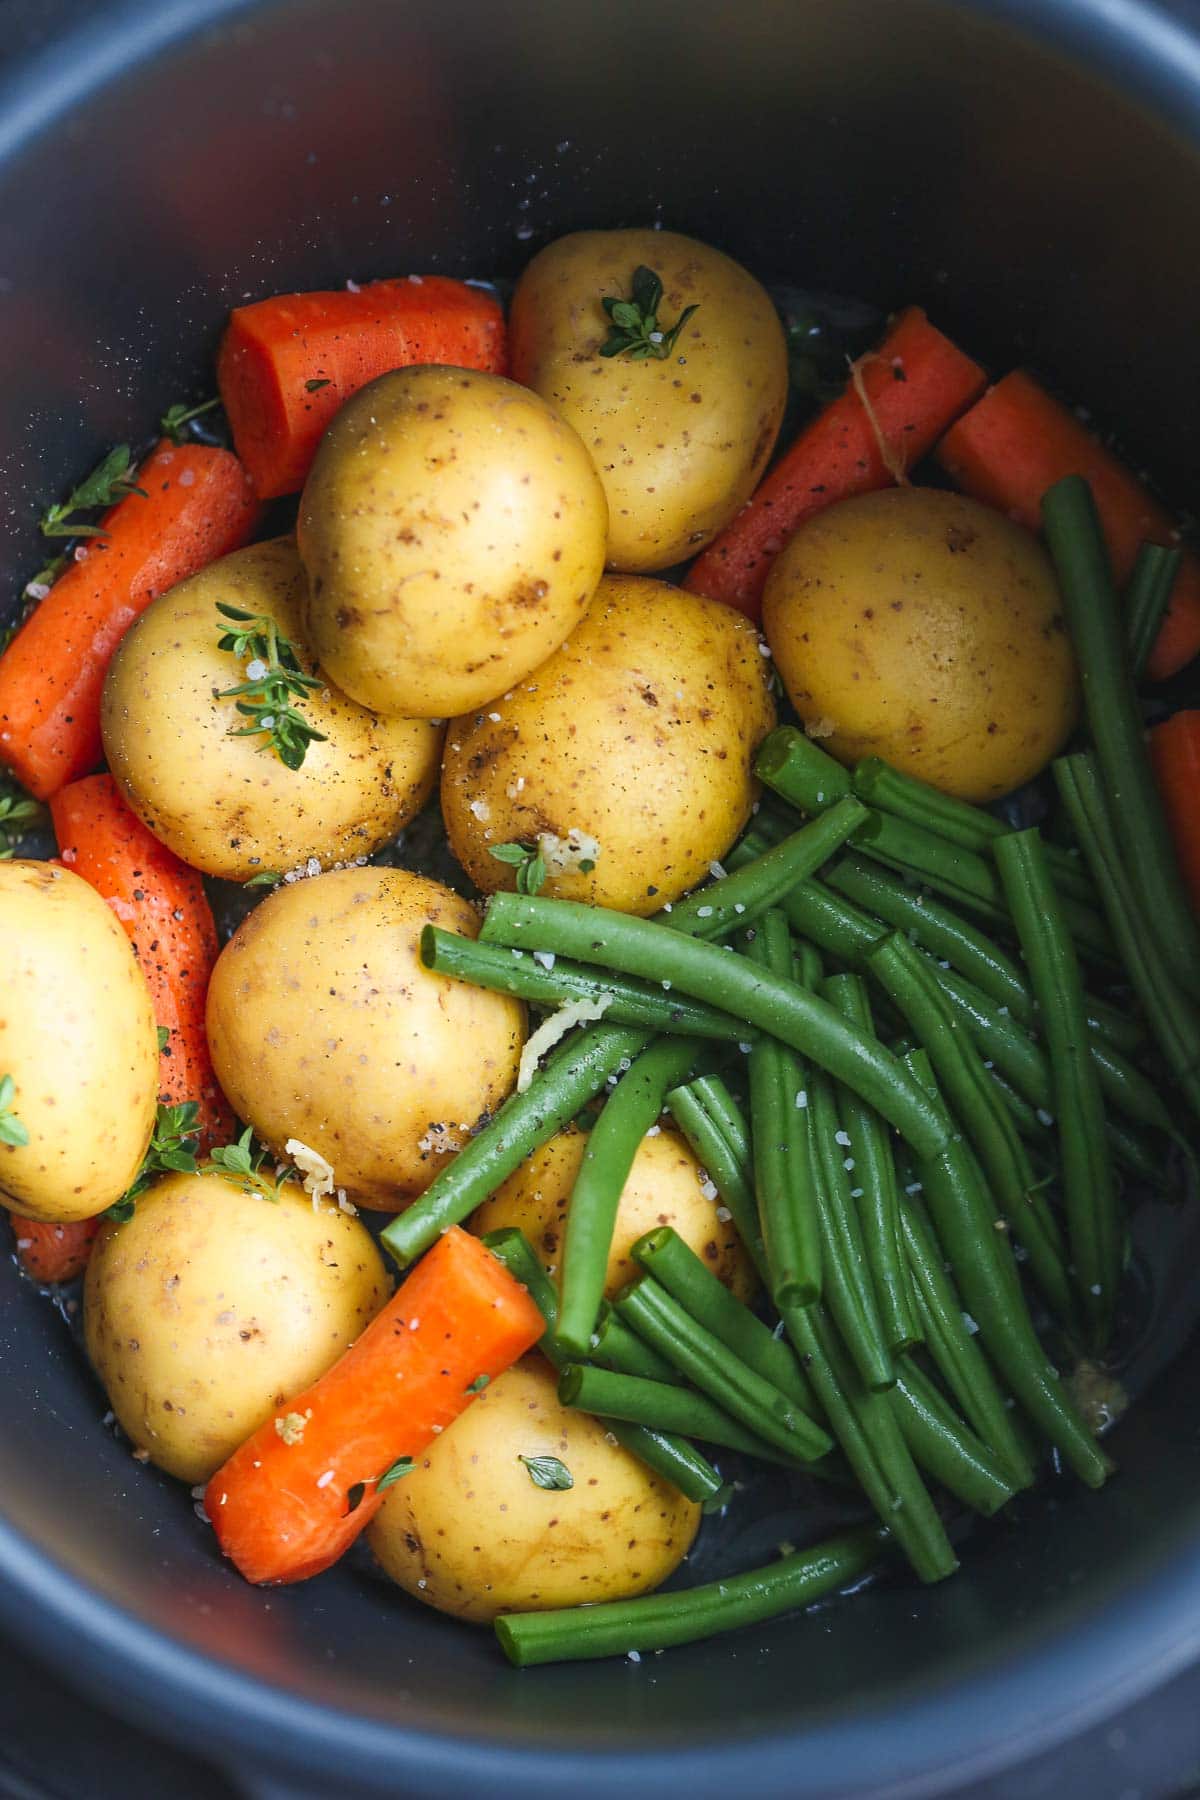 Baby potatoes, carrots and green beans in the Instant Pot